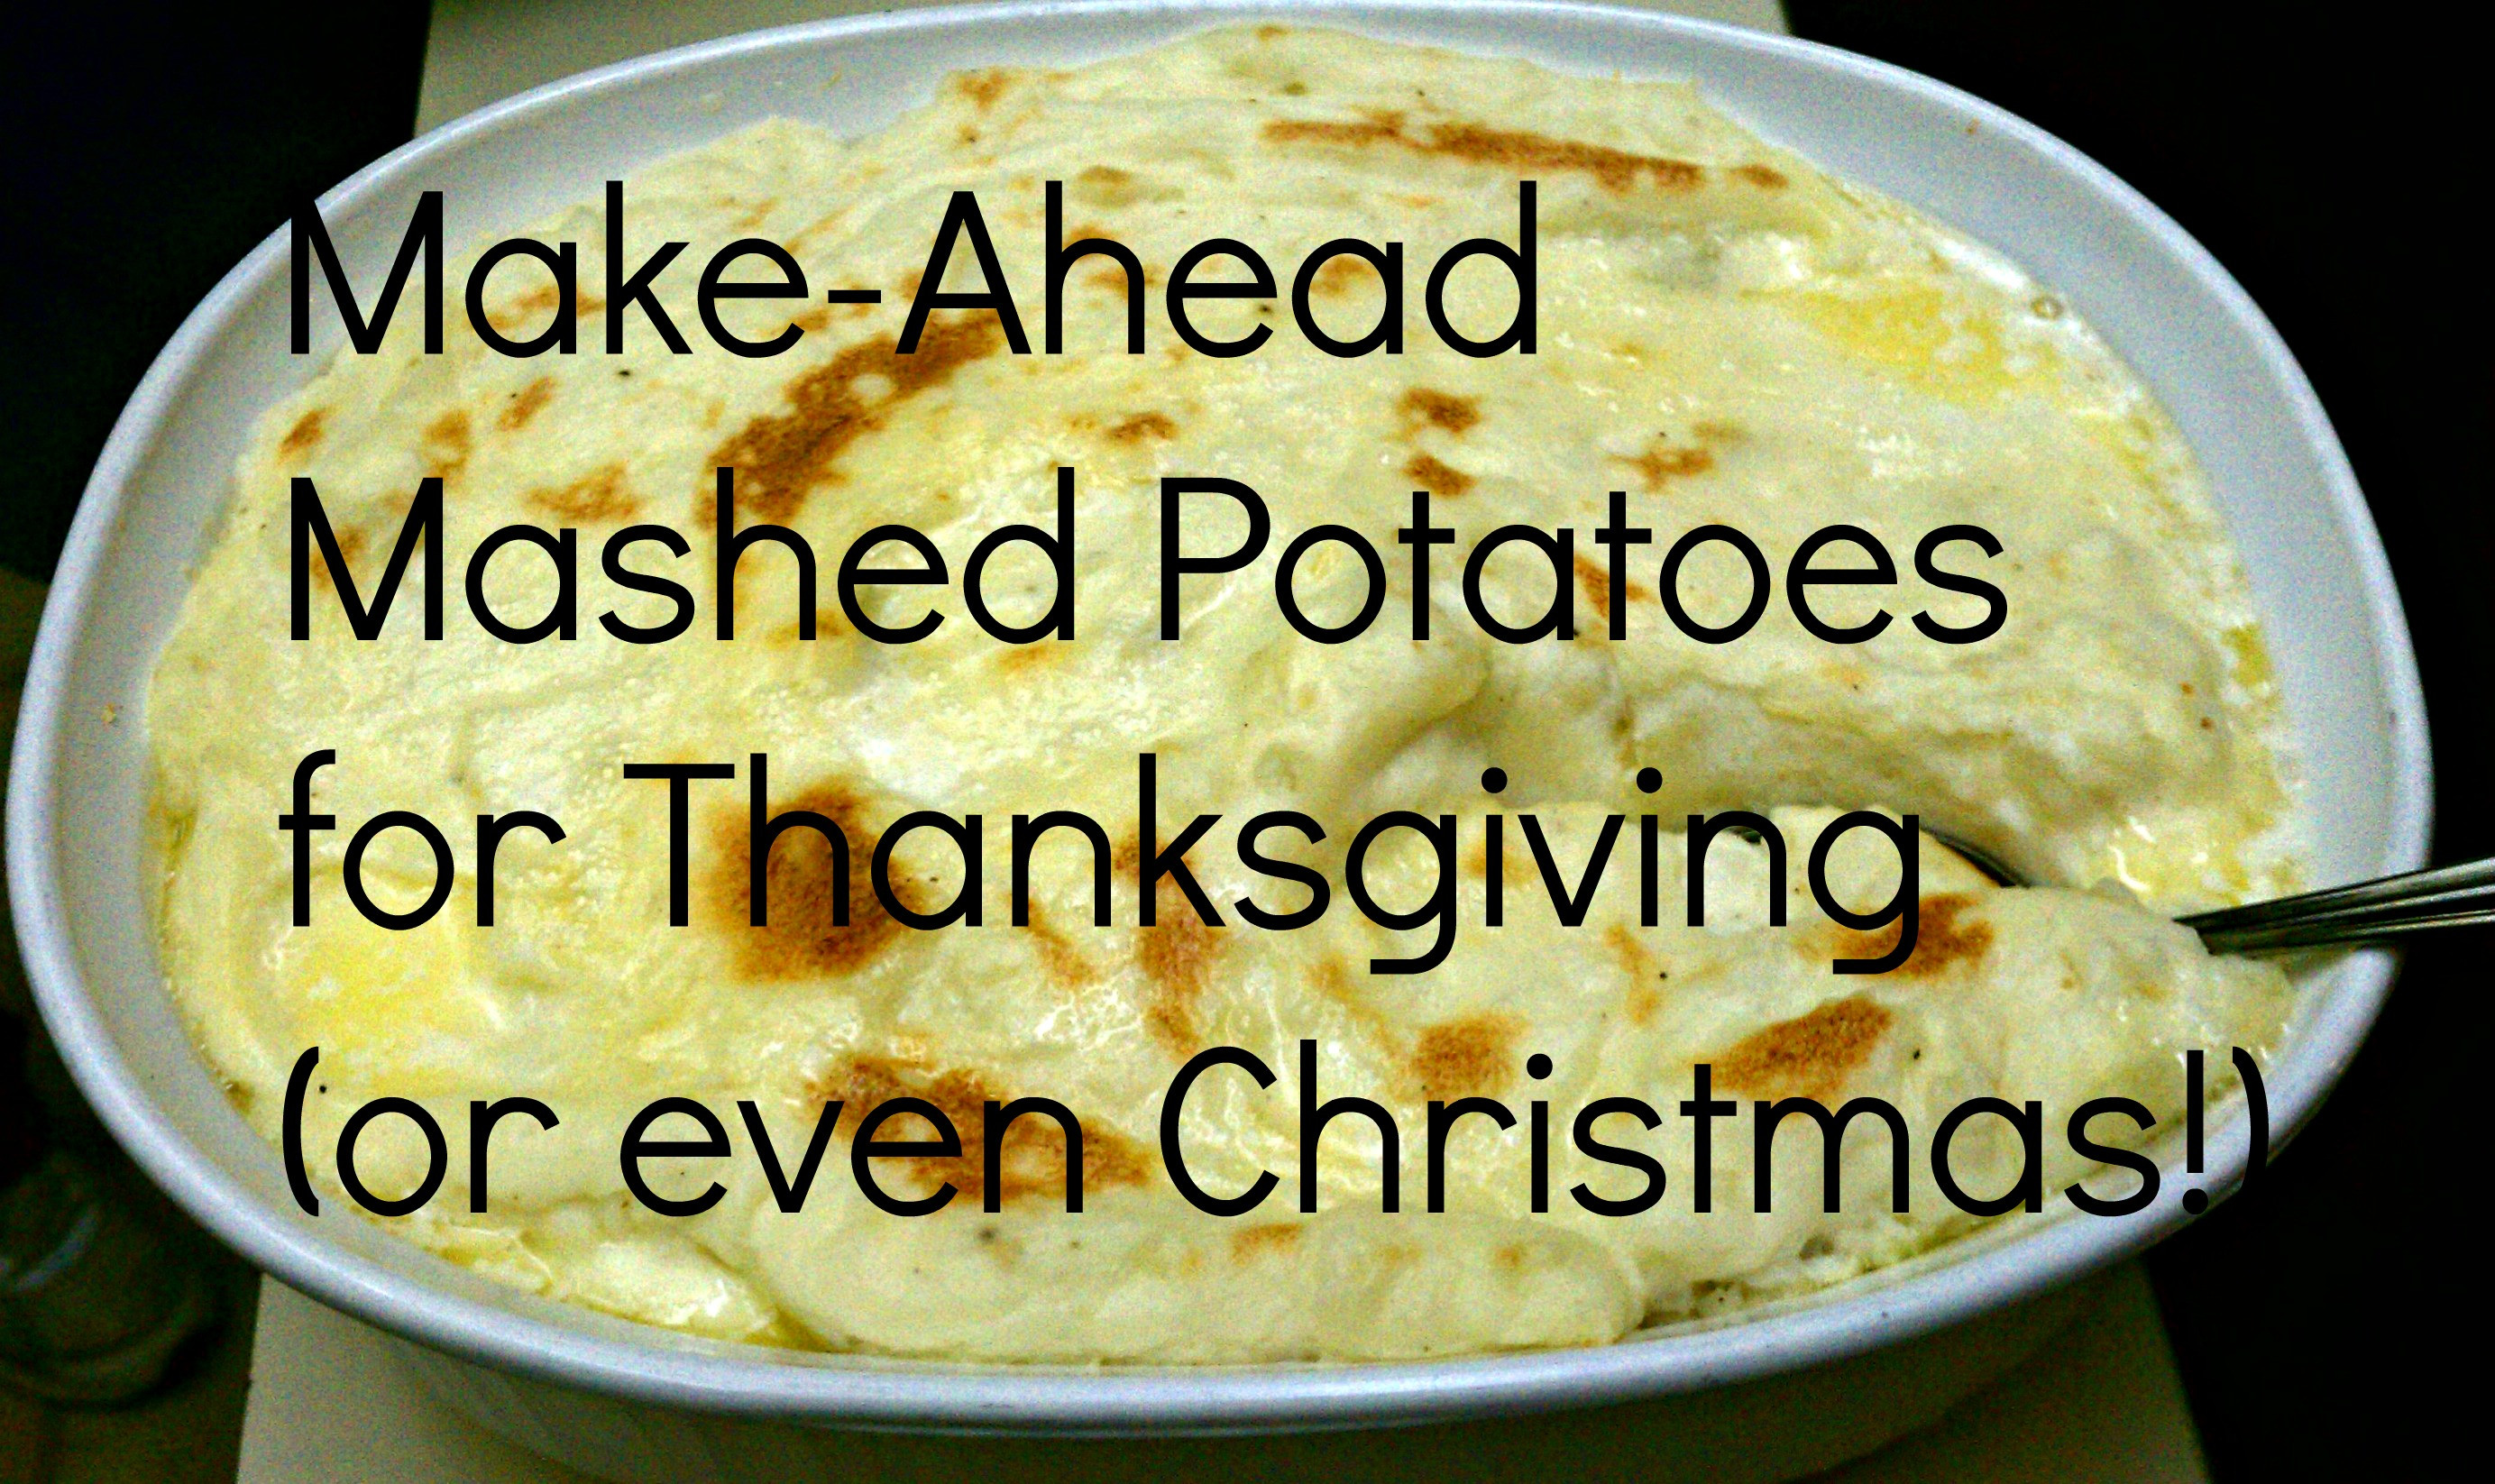 Mashed Potatoes Recipe For Thanksgiving
 How To Freeze Mashed Potatoes Now For Thanksgiving